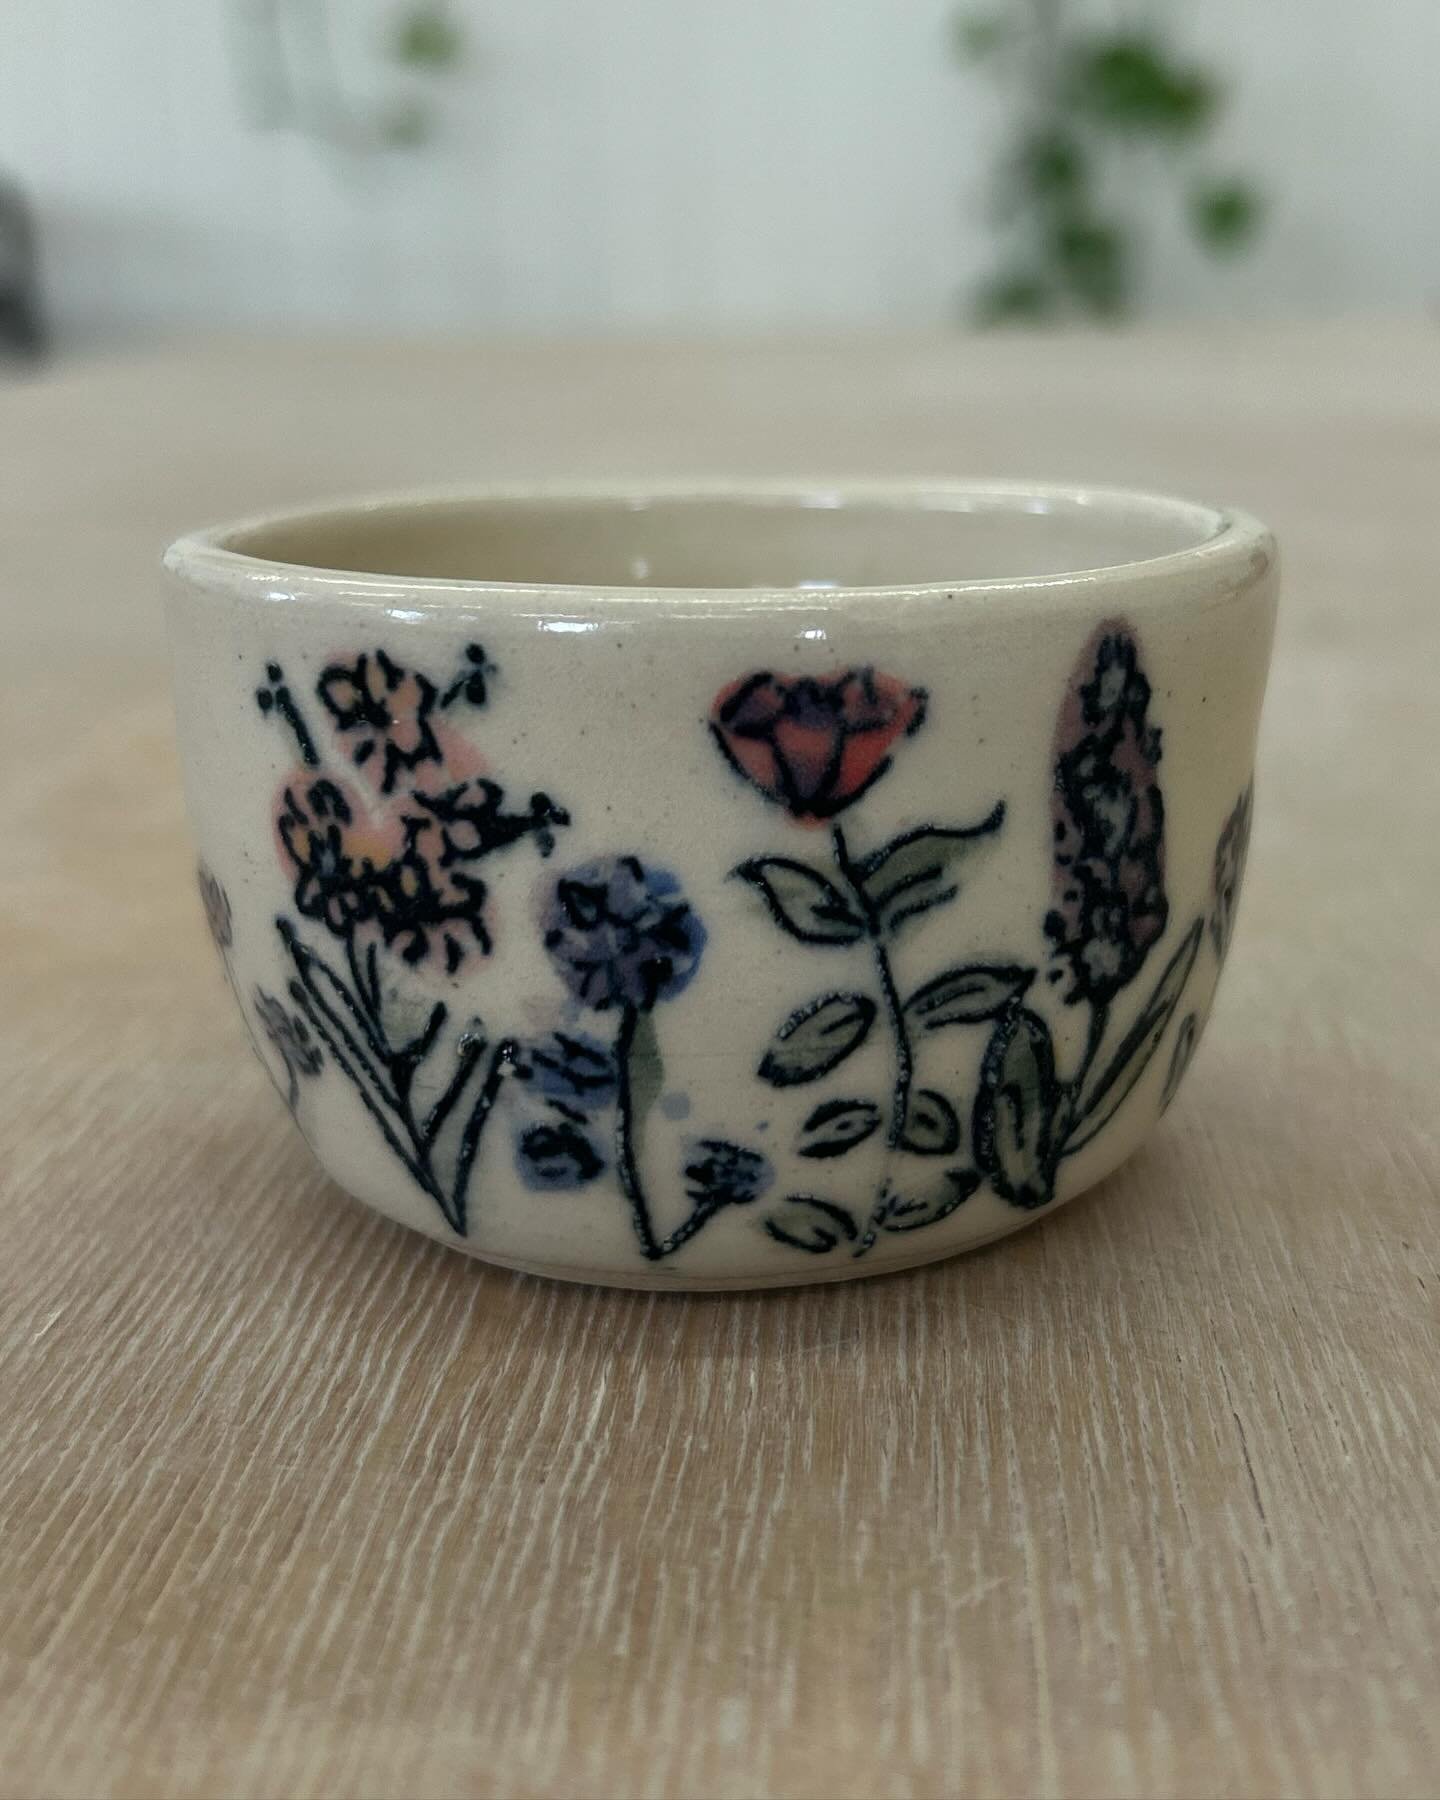 Want to name this cute bowl&hellip; any ideas??! 

&hellip;..
#Instapottery #instaceramics #claylife #potterystudio #buyhandmade #makersofinstagram #handmademug #handmadebowl #potteryforall #modernceramics #potterymug #colorfulceramics #potteryofinst